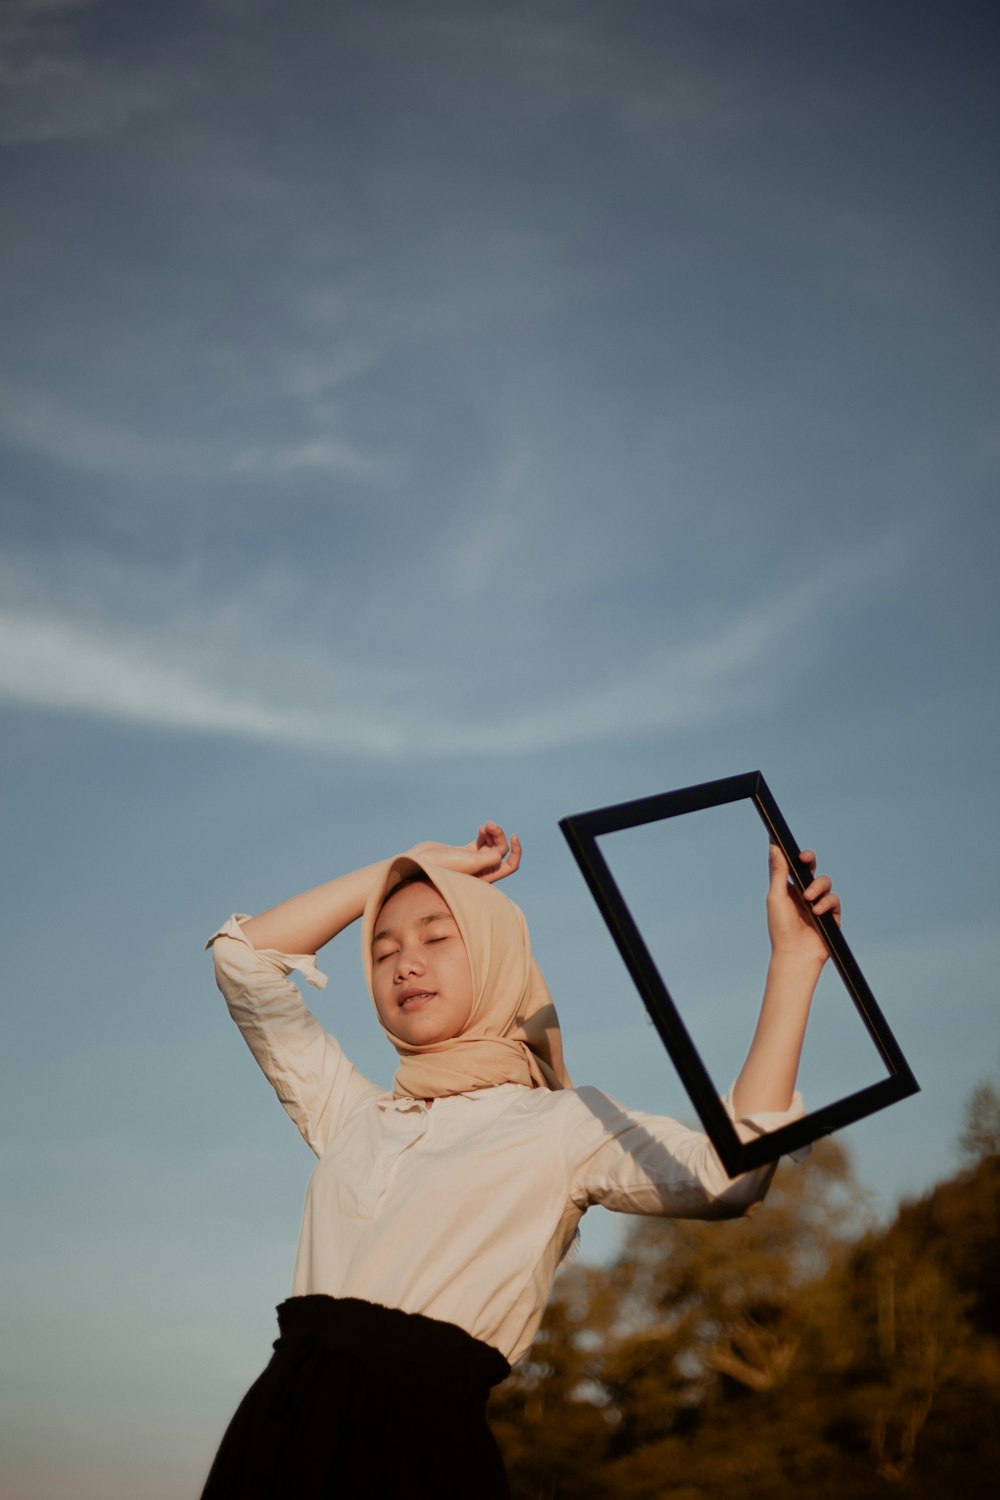 close-up photography of girl standing near outdoor while holding photo frame